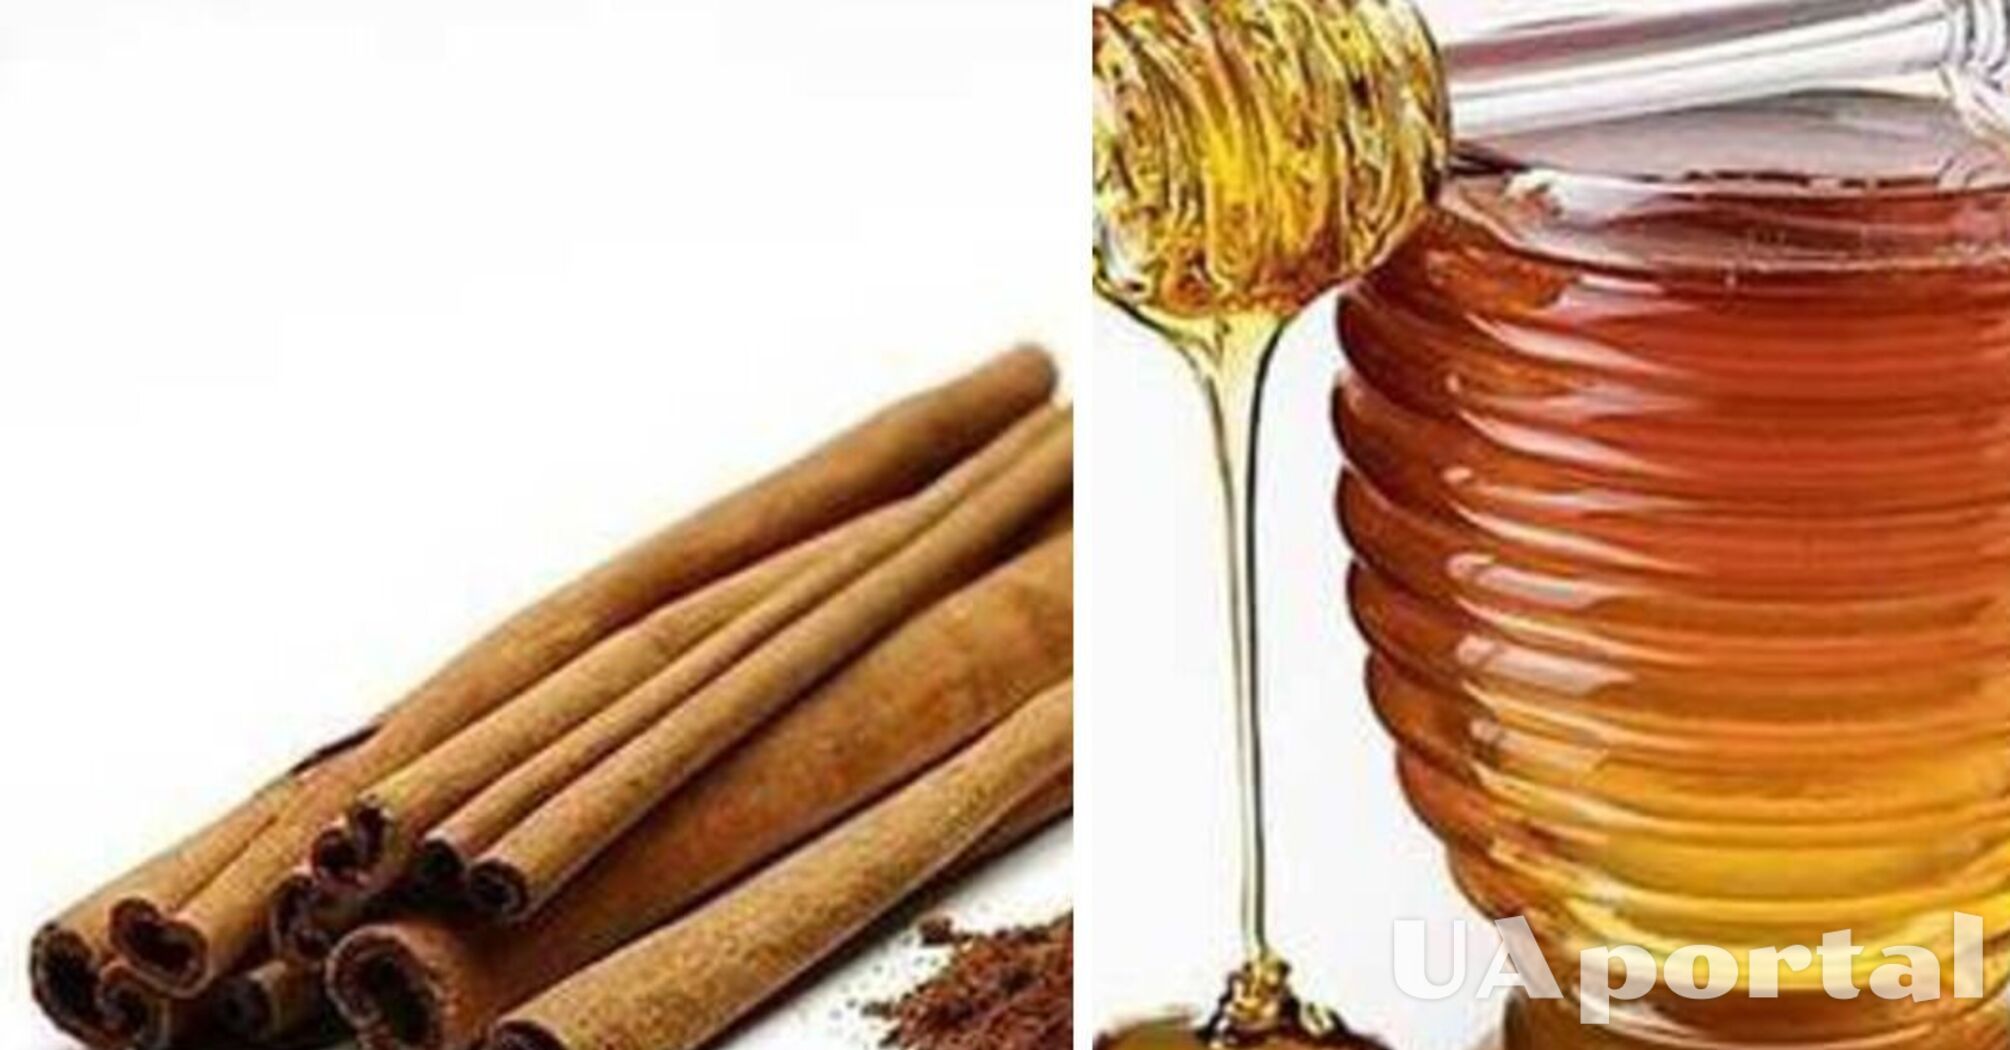 Heals wounds and helps with diabetes: why you should include cinnamon honey in your diet